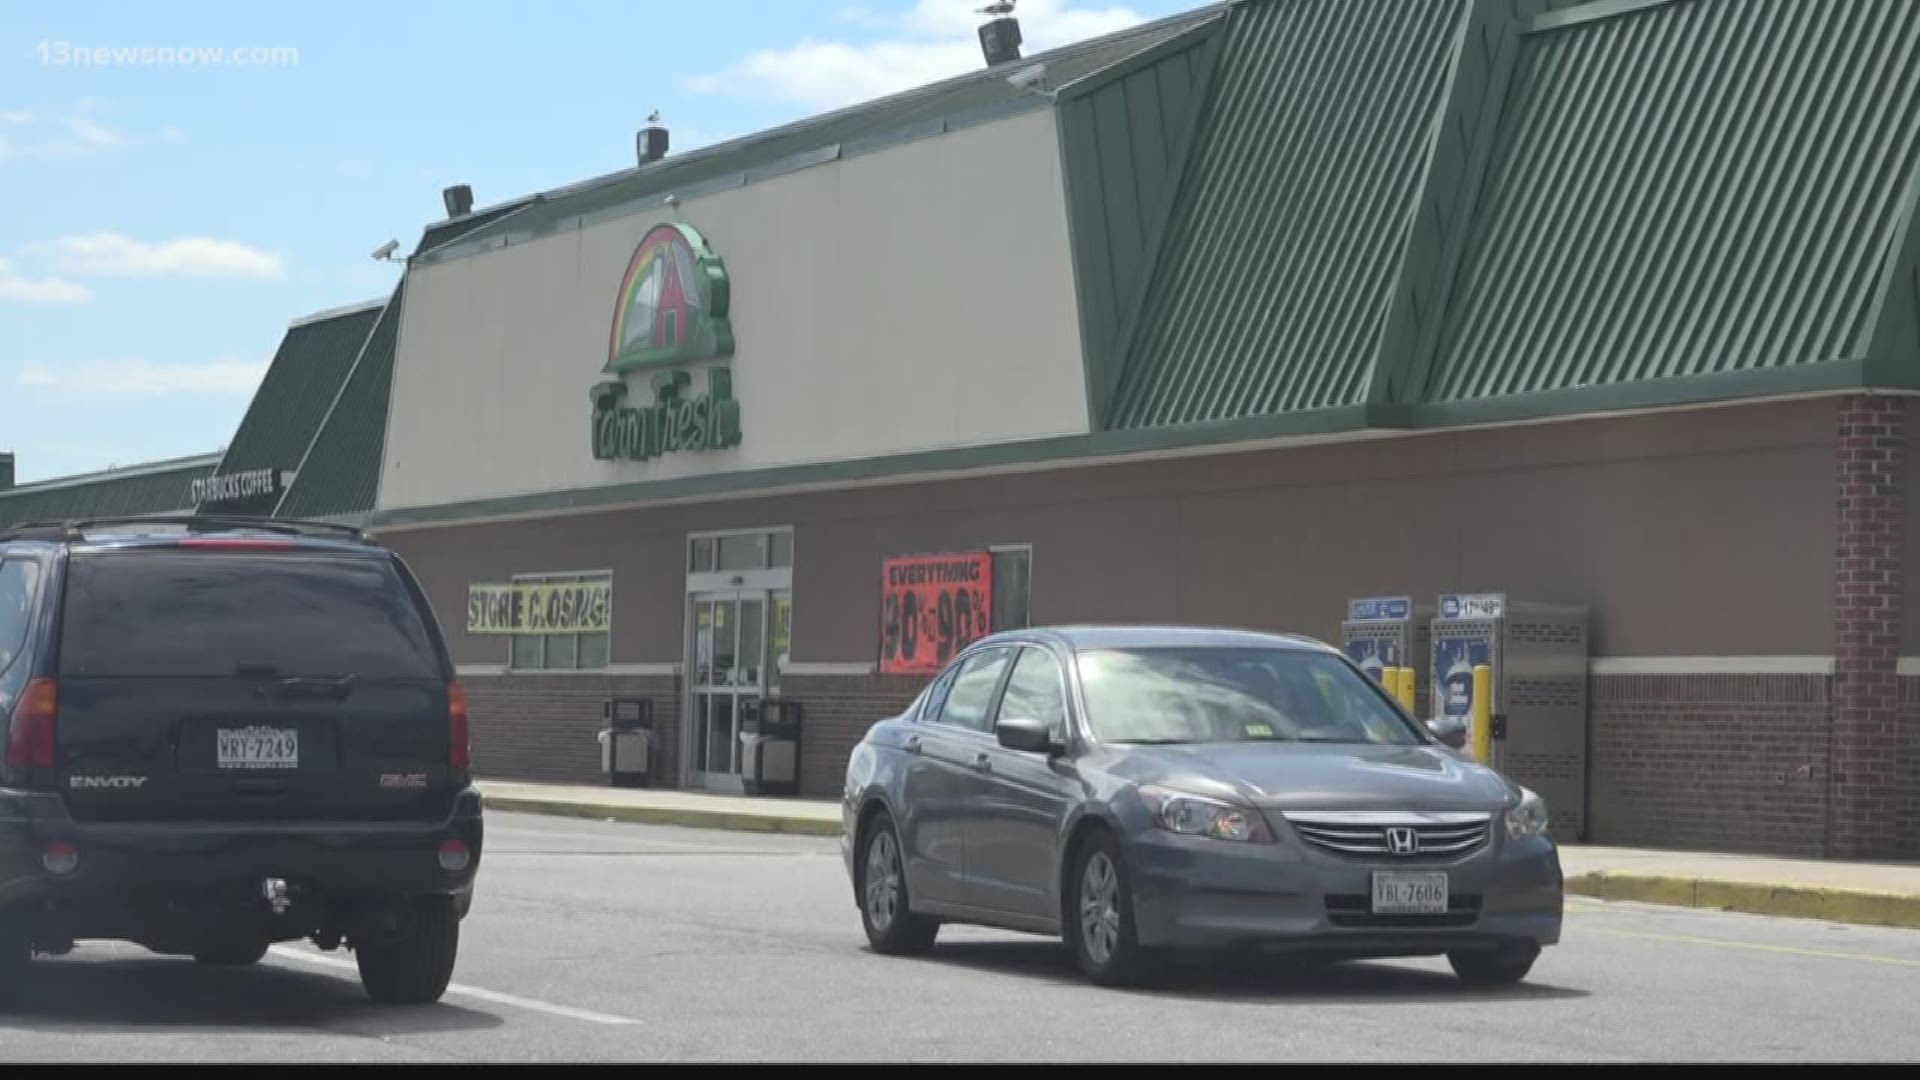 Today several Farm Fresh stores will officially close their doors for business.